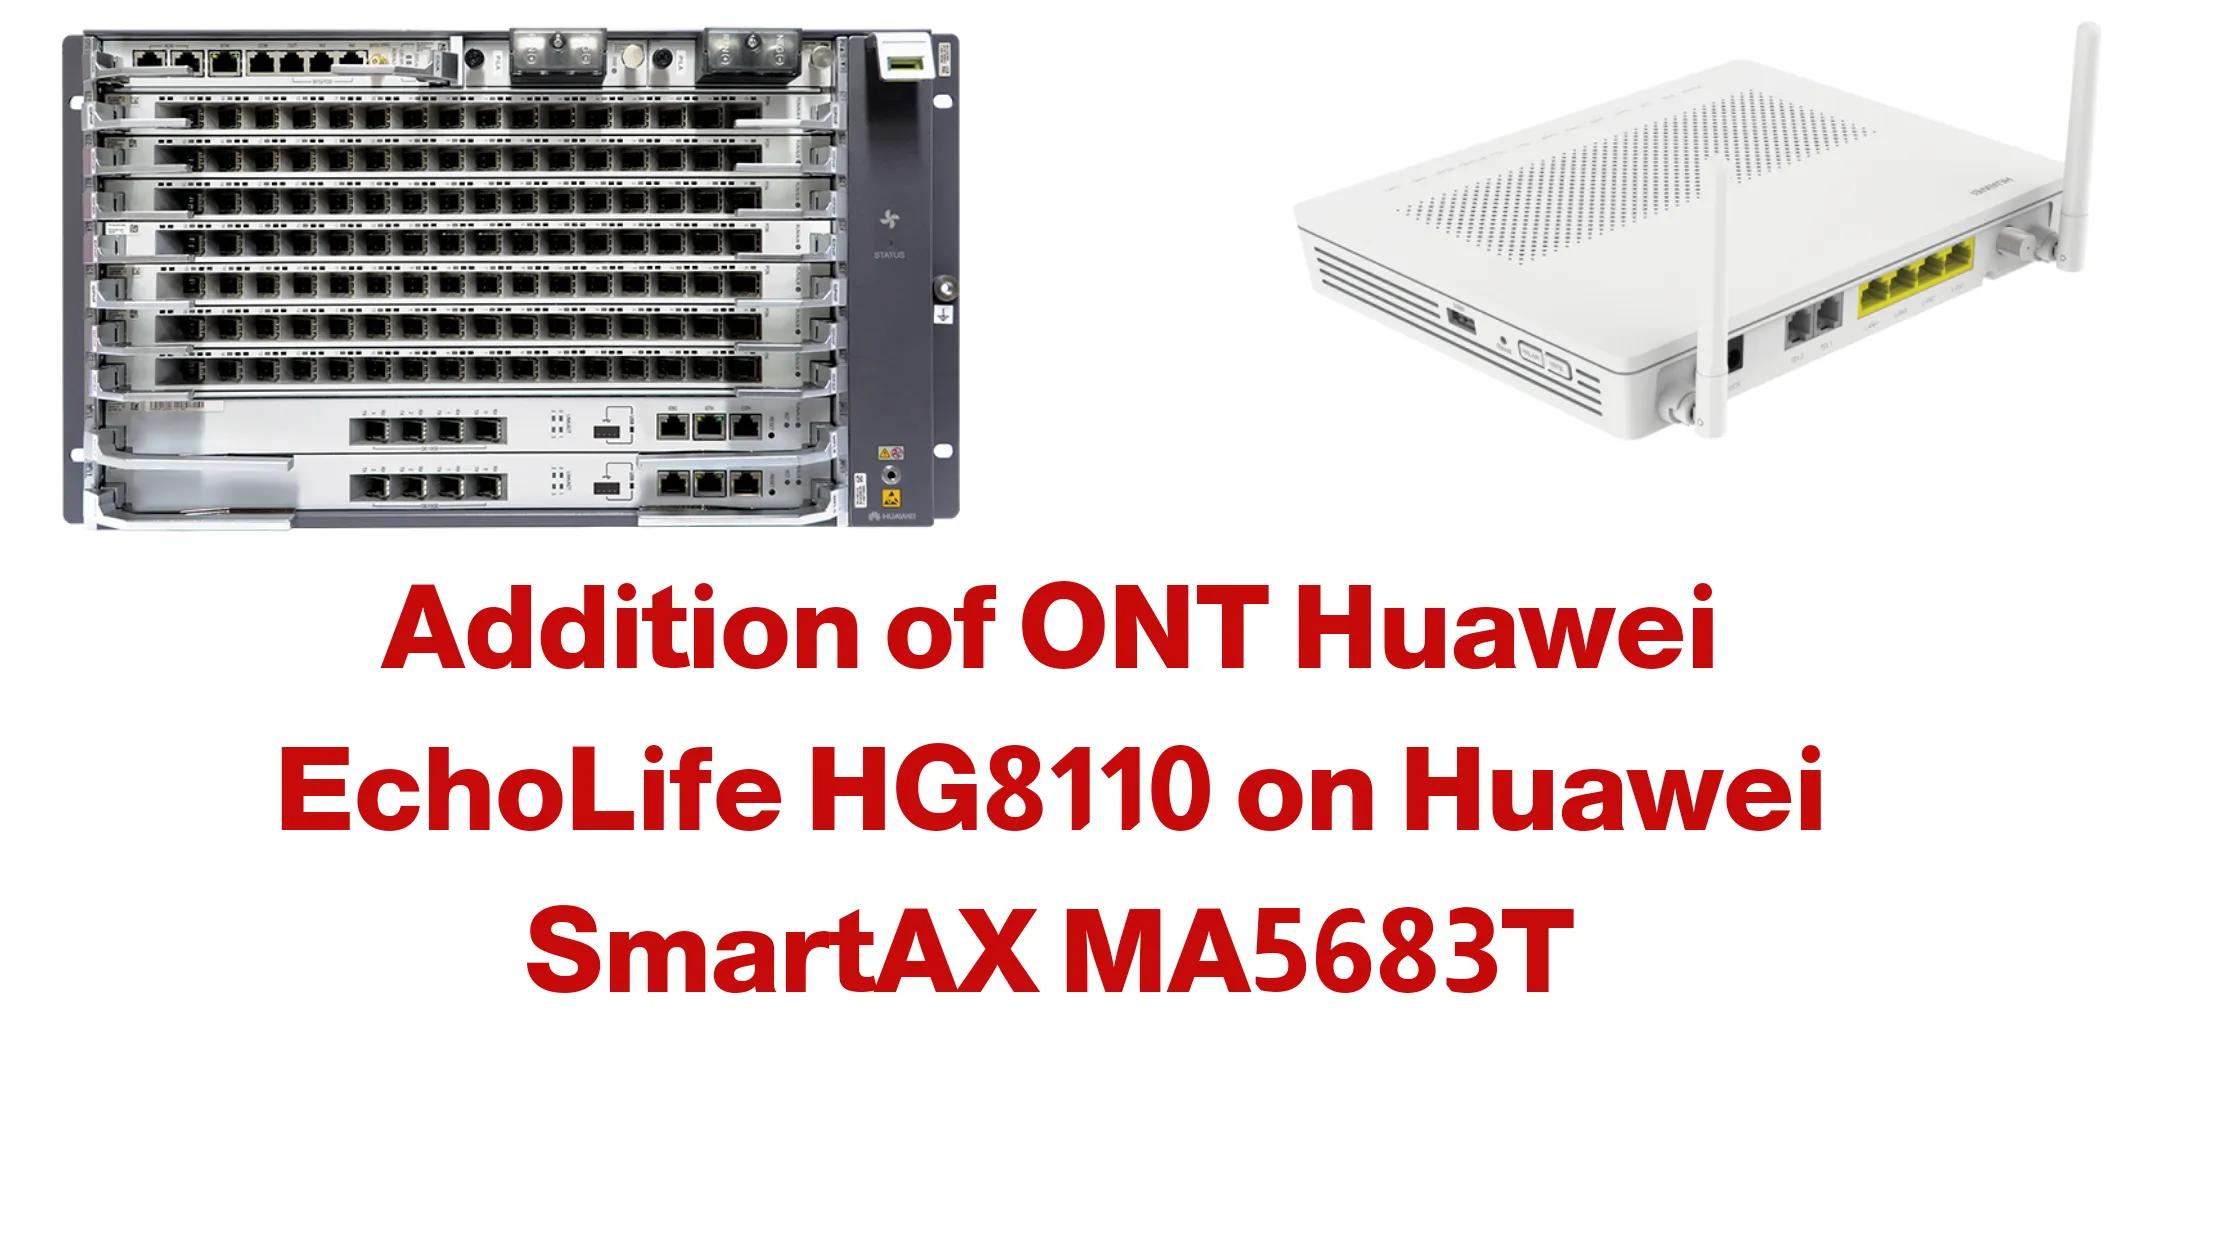 Adding ONT to an Huawei